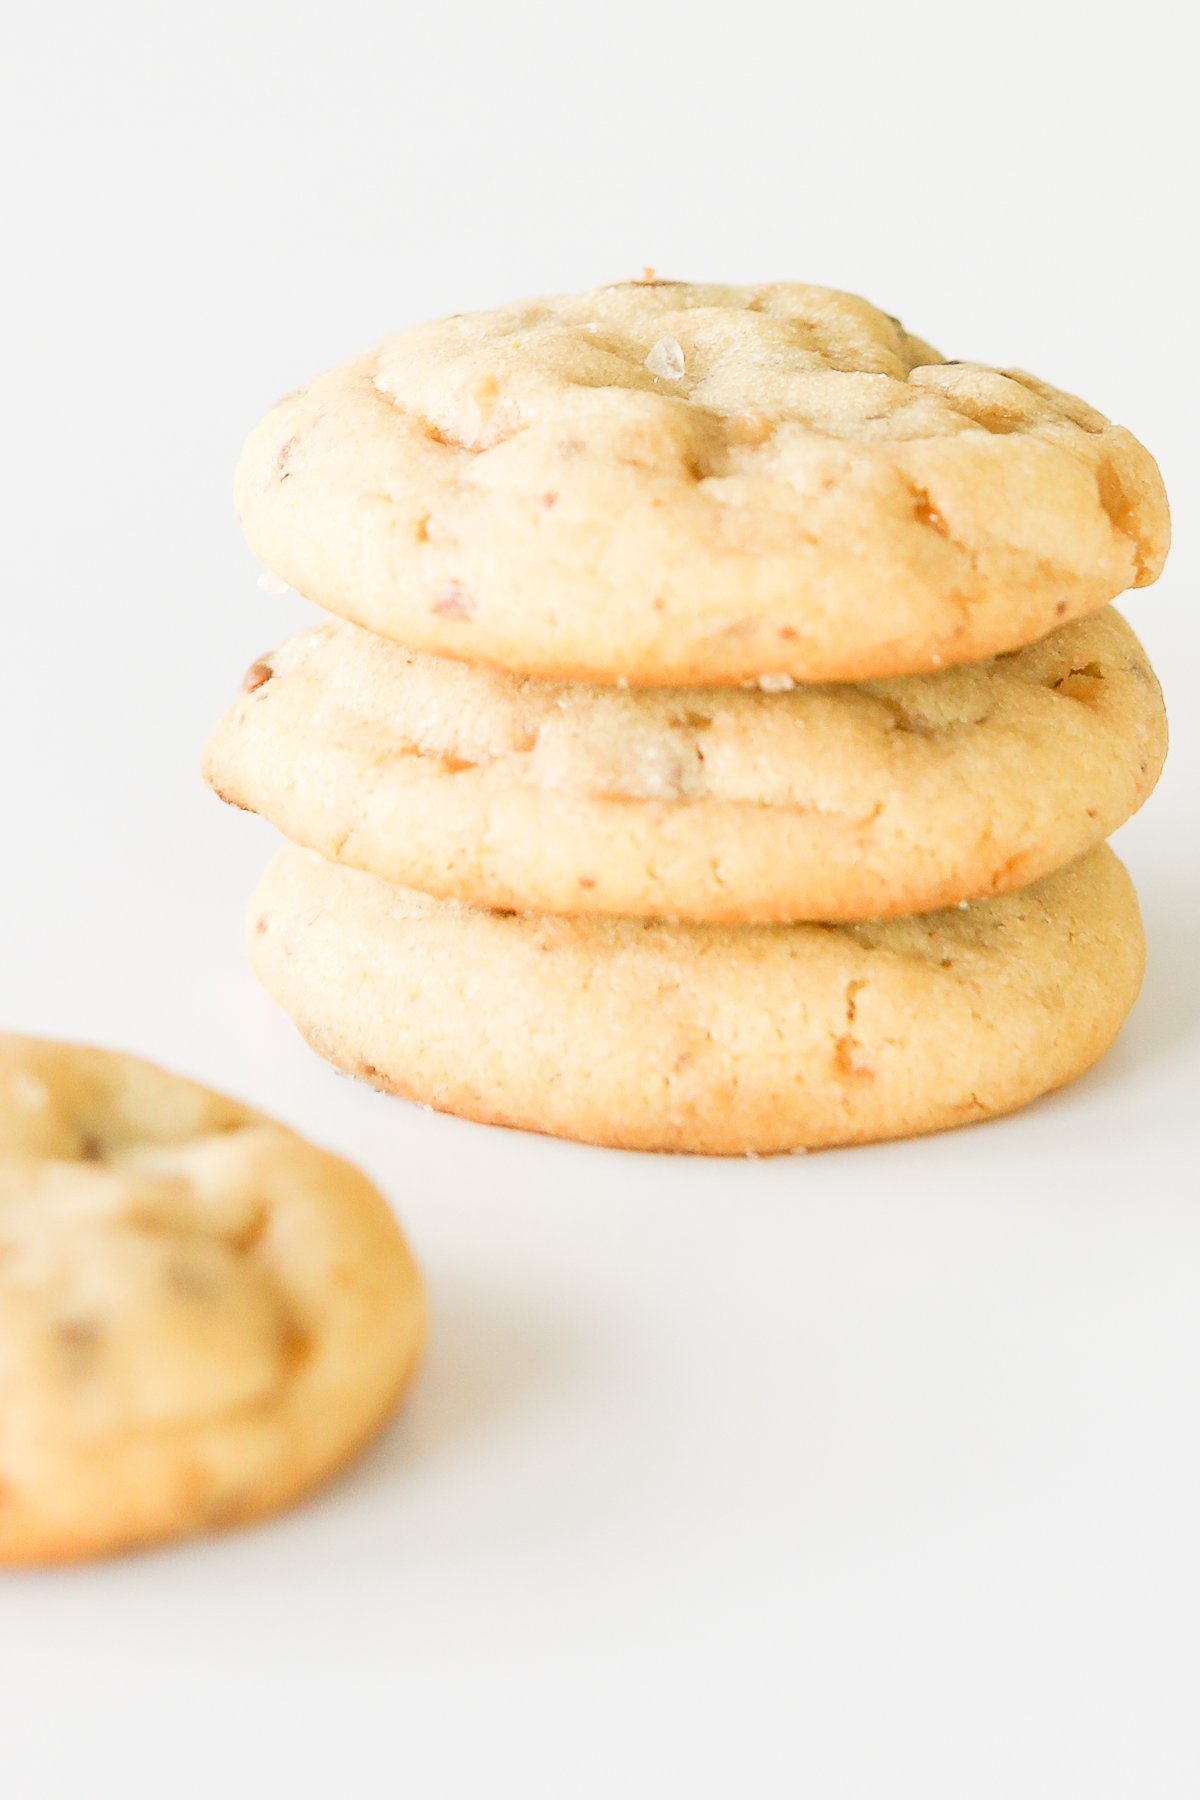 A stack of toffee cookies on a white surface.